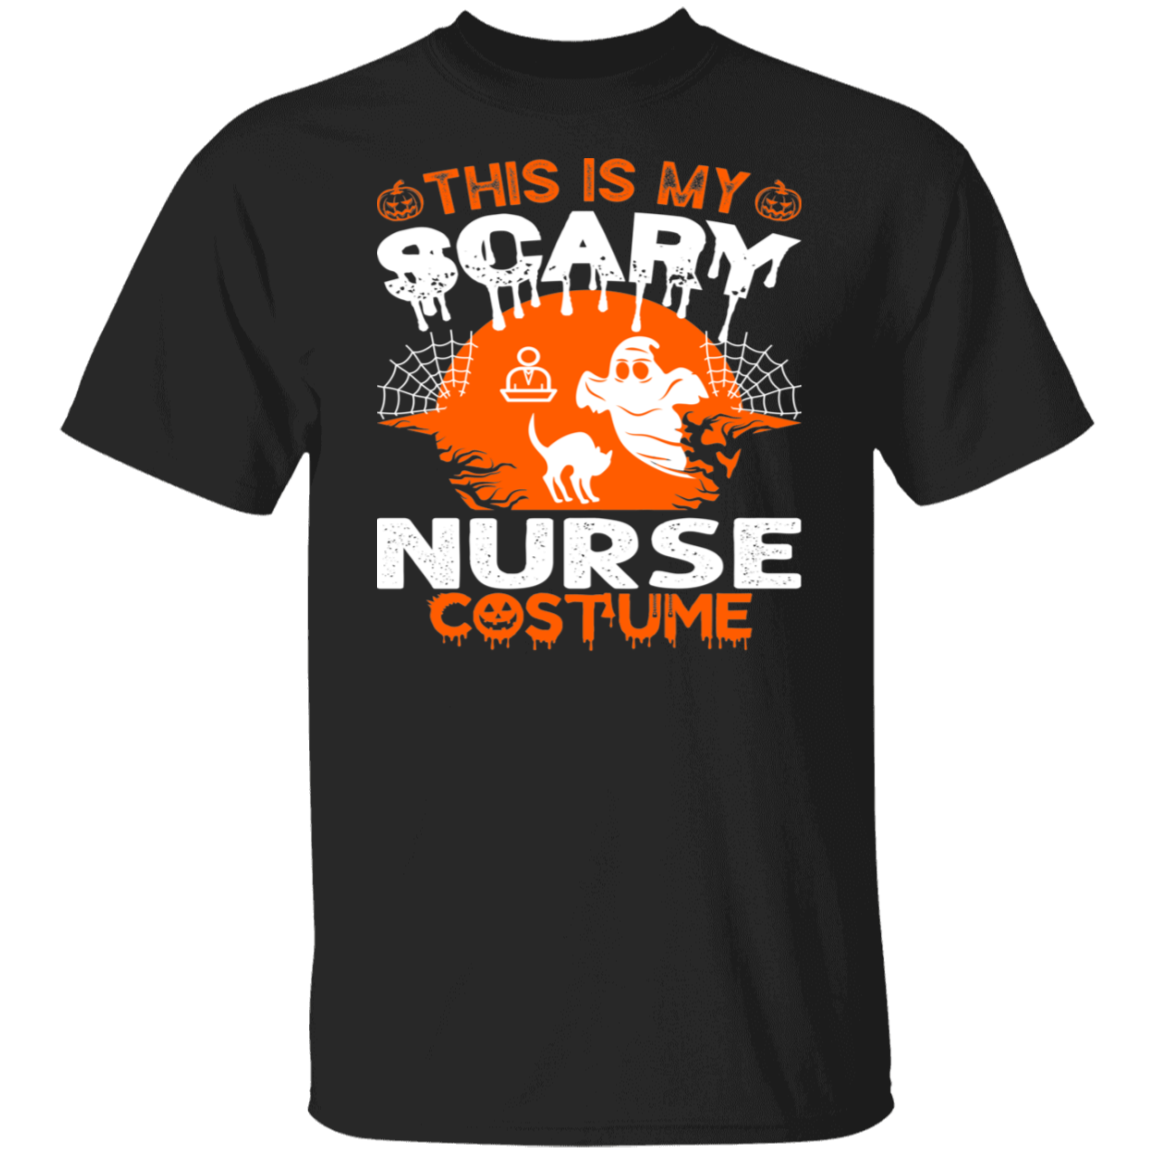 This Is My Scary Nurse Costume T-Shirt